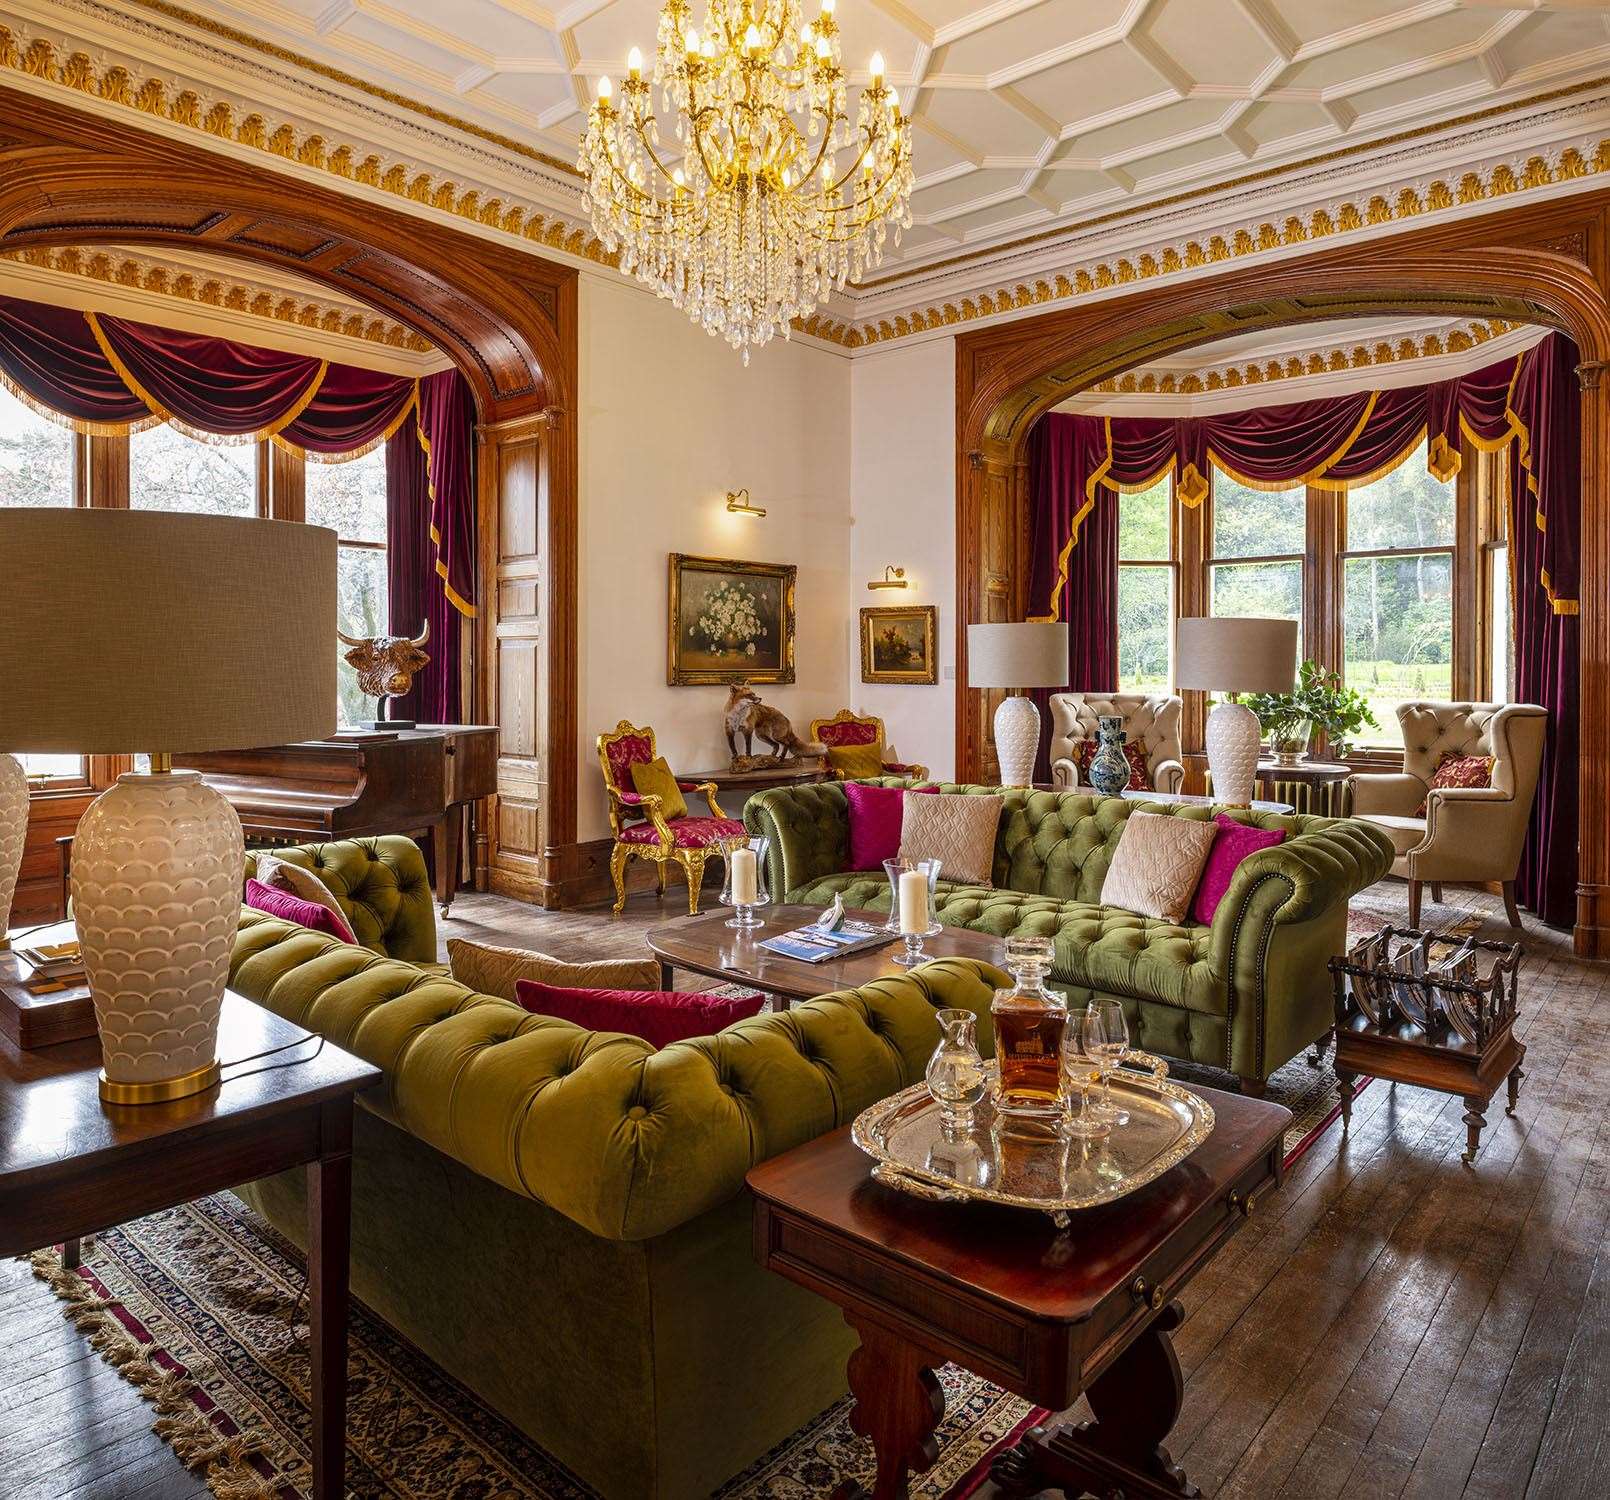 The interior of Rothes Glen has been revamped throughout and finished with original furnishings.